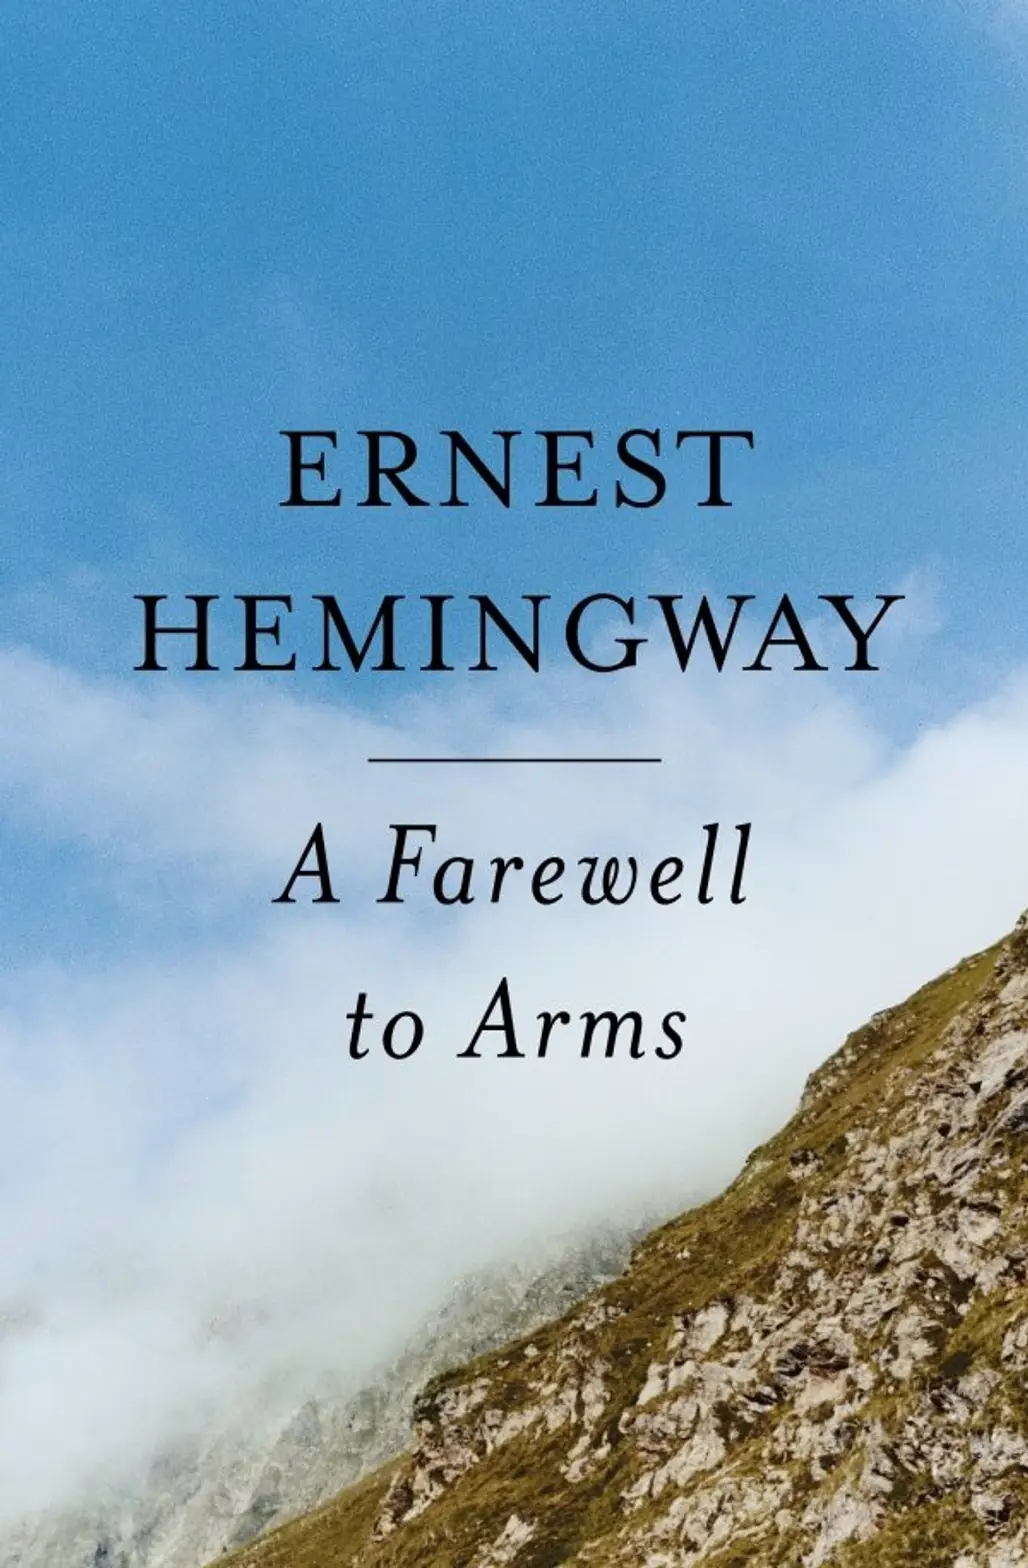 A Farewell to Arms by Ernest Hemingway (1929)